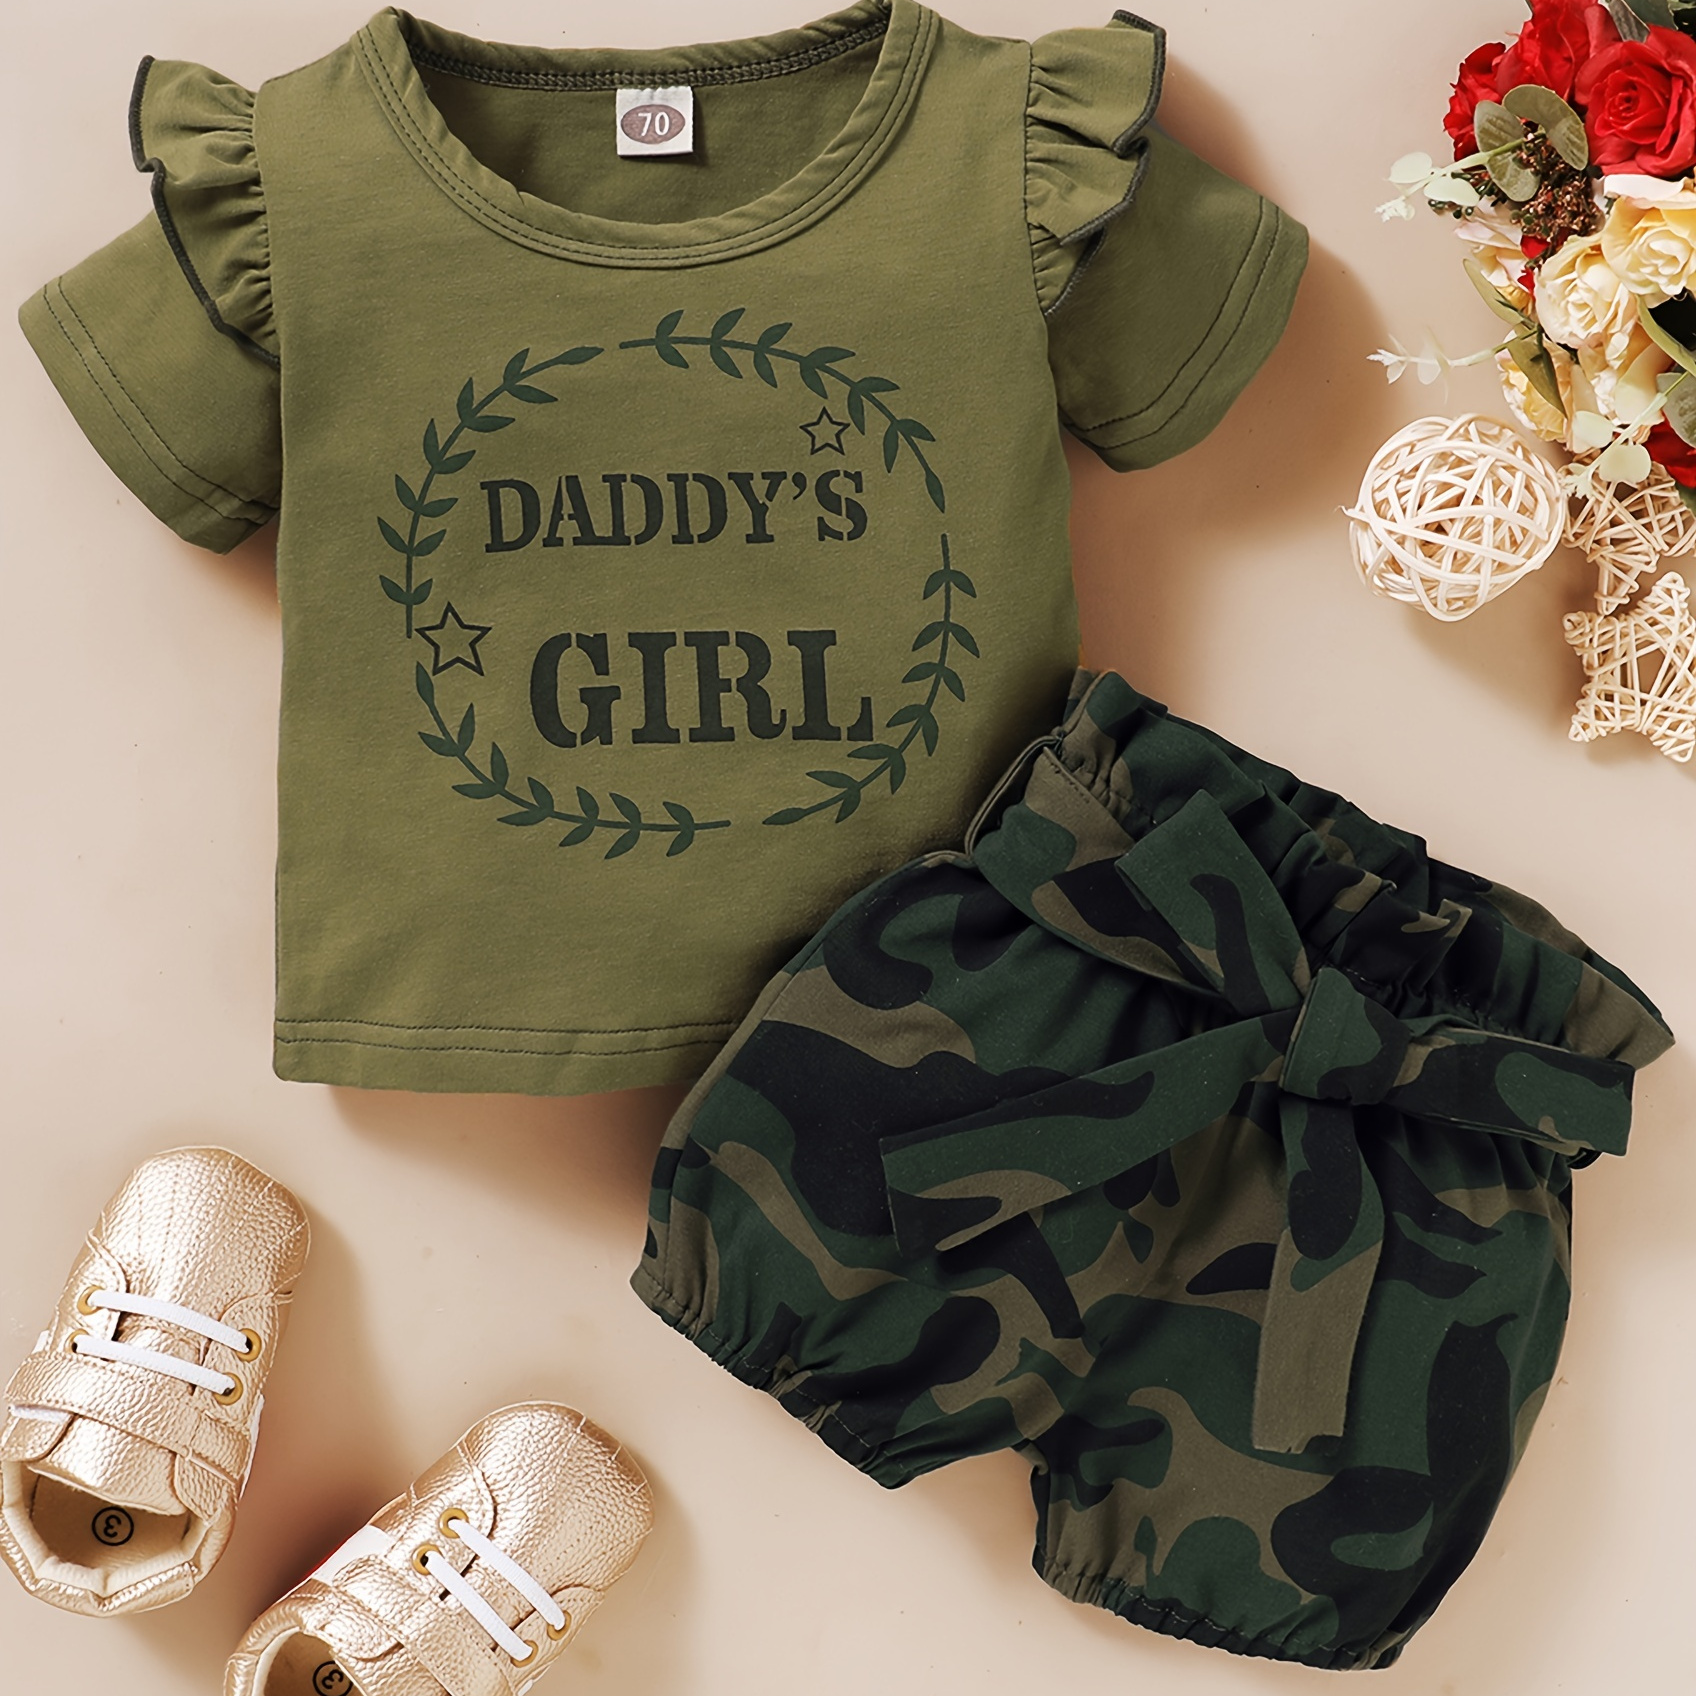 

2pcs Toddler's "daddy's Girl" Print Summer Set, T-shirt & Camouflage Pattern Shorts, Baby Girl's Clothing